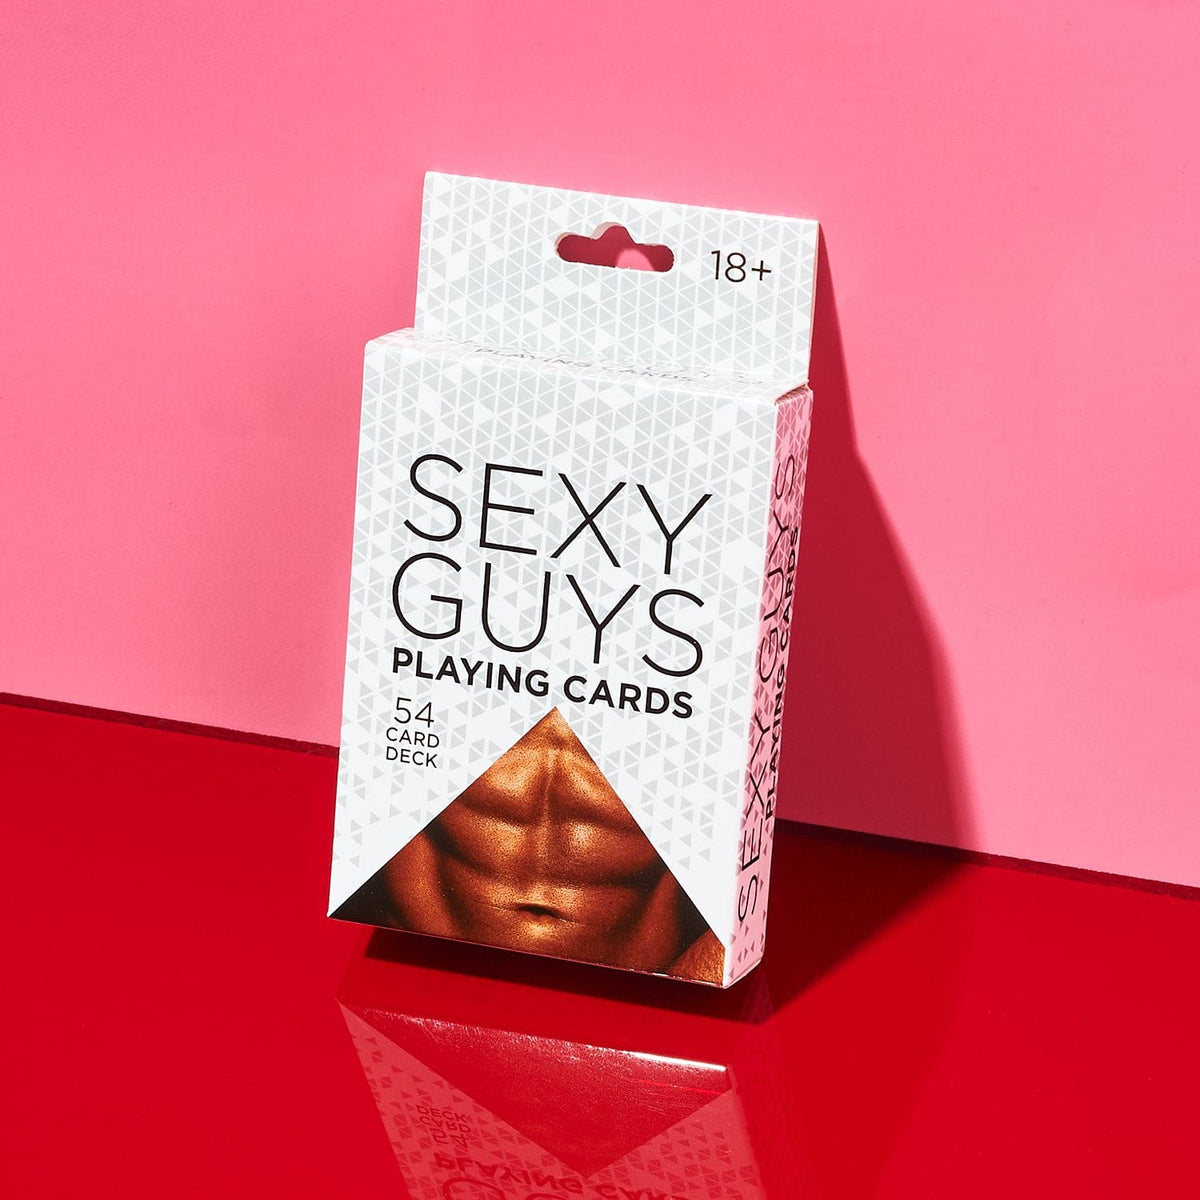 Sexy Guys Playing Cards Bachelorette Gifts - Bff - Gag Gift